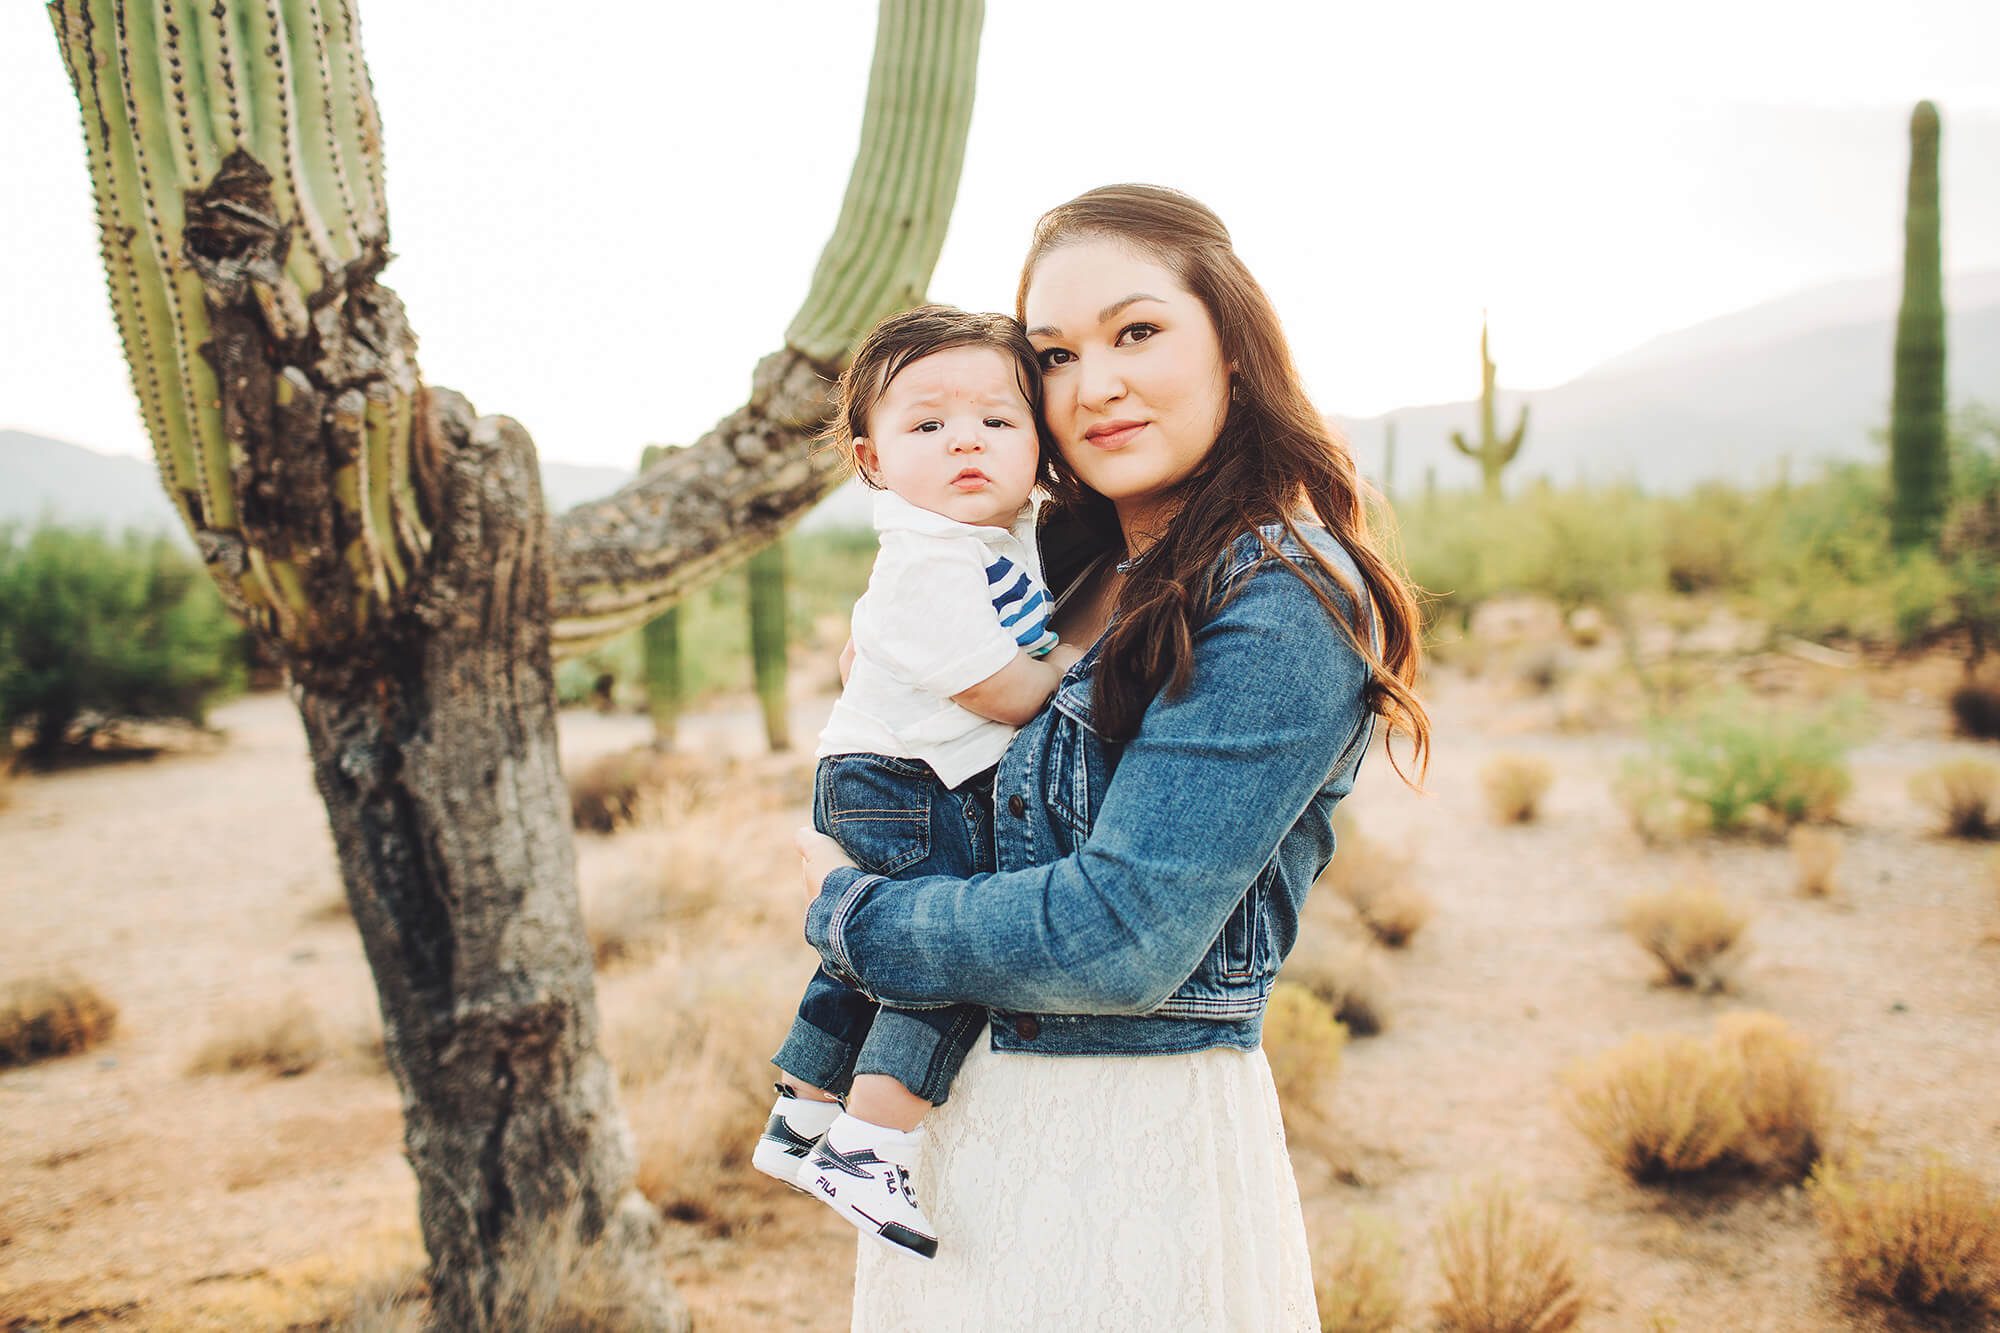 Alicia and Easton cuddling in front of a saguaro